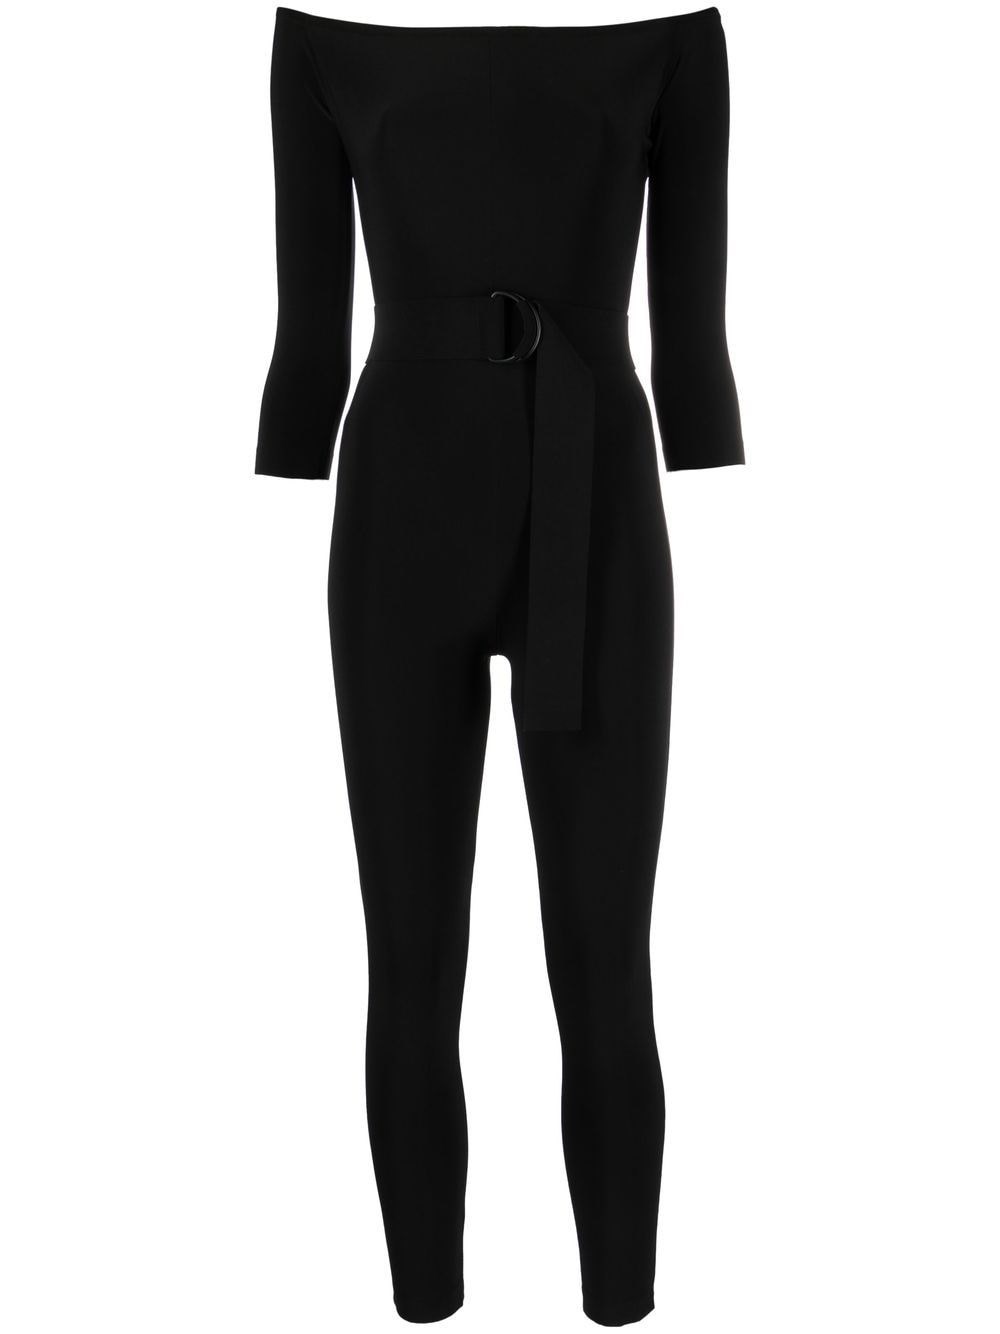 NORMA KAMALI OFF-THE-SHOULDER CATSUIT